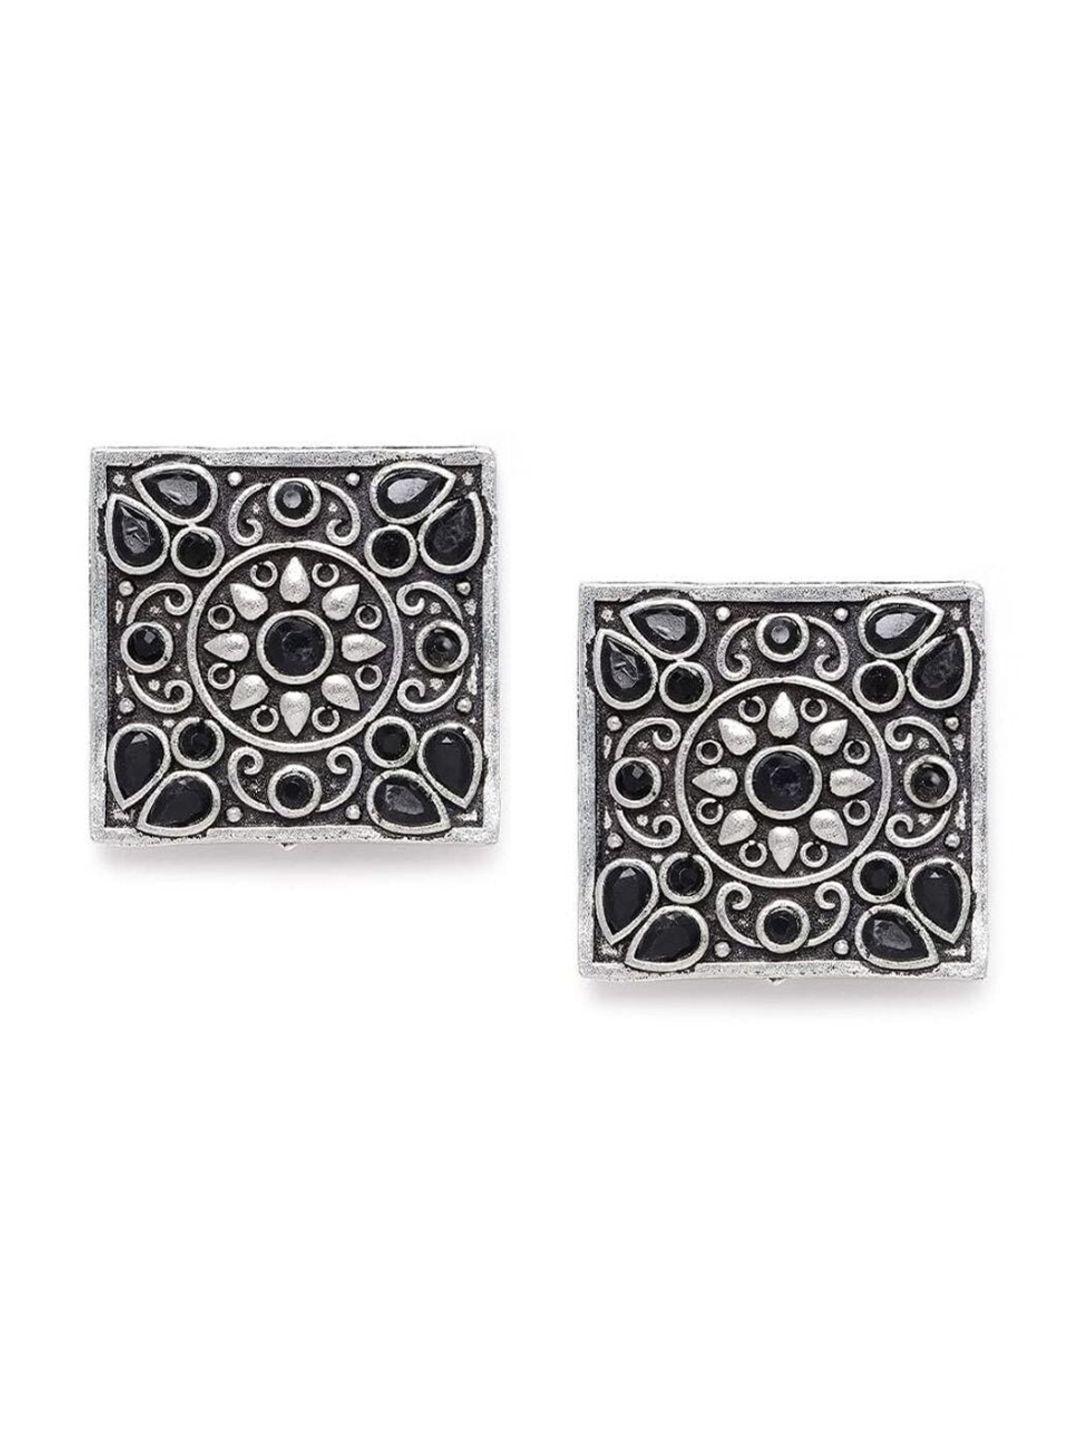 accessher silver-toned square studs earrings